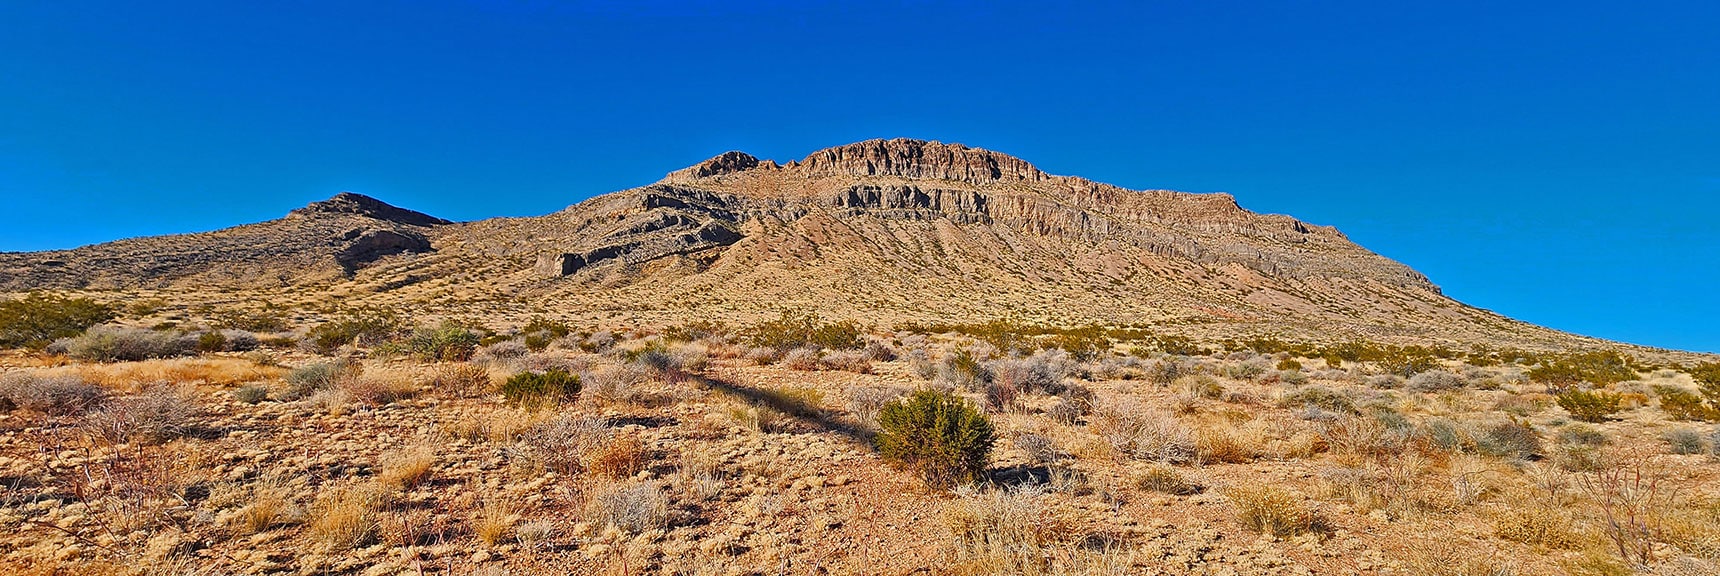 The South Side is Mostly Vertical. Summit Gully to Left Gets You to Central Cliff Base. | Landmark Bluff Circuit | Lovell Canyon, Nevada